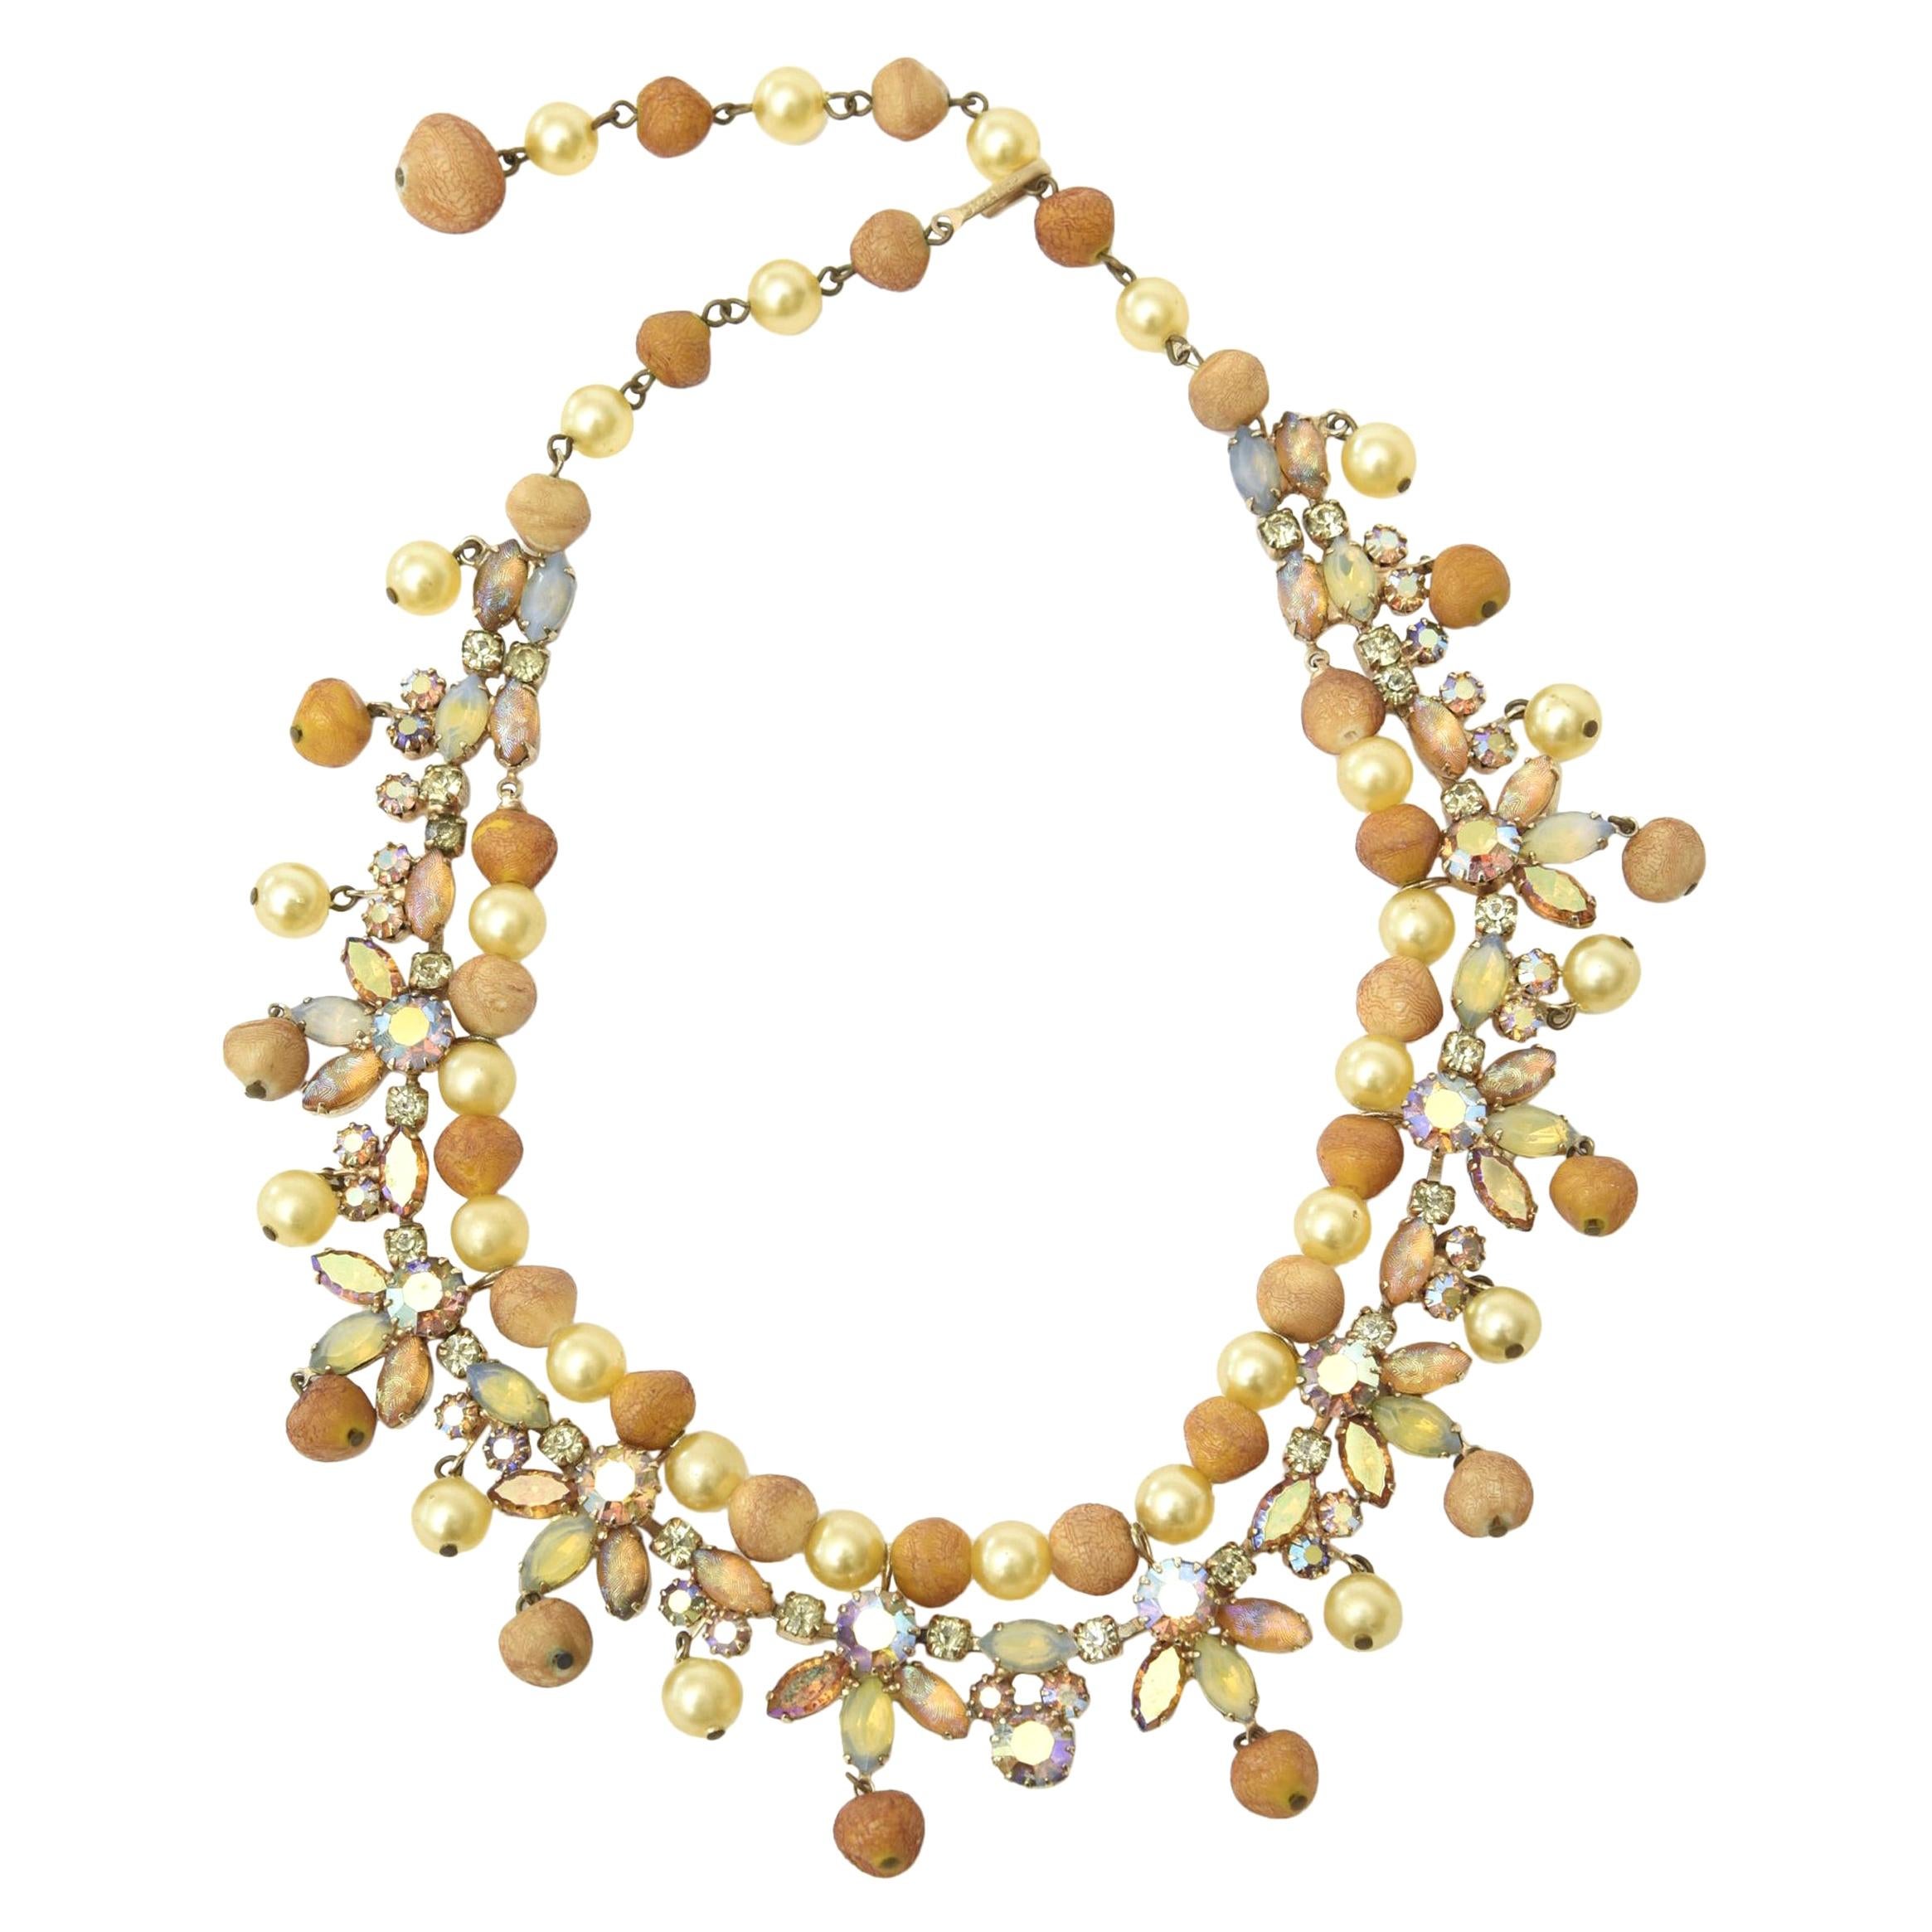 Kramer Rhinestone, Faux Pearl & Resin Collar Necklace Vintage For Sale